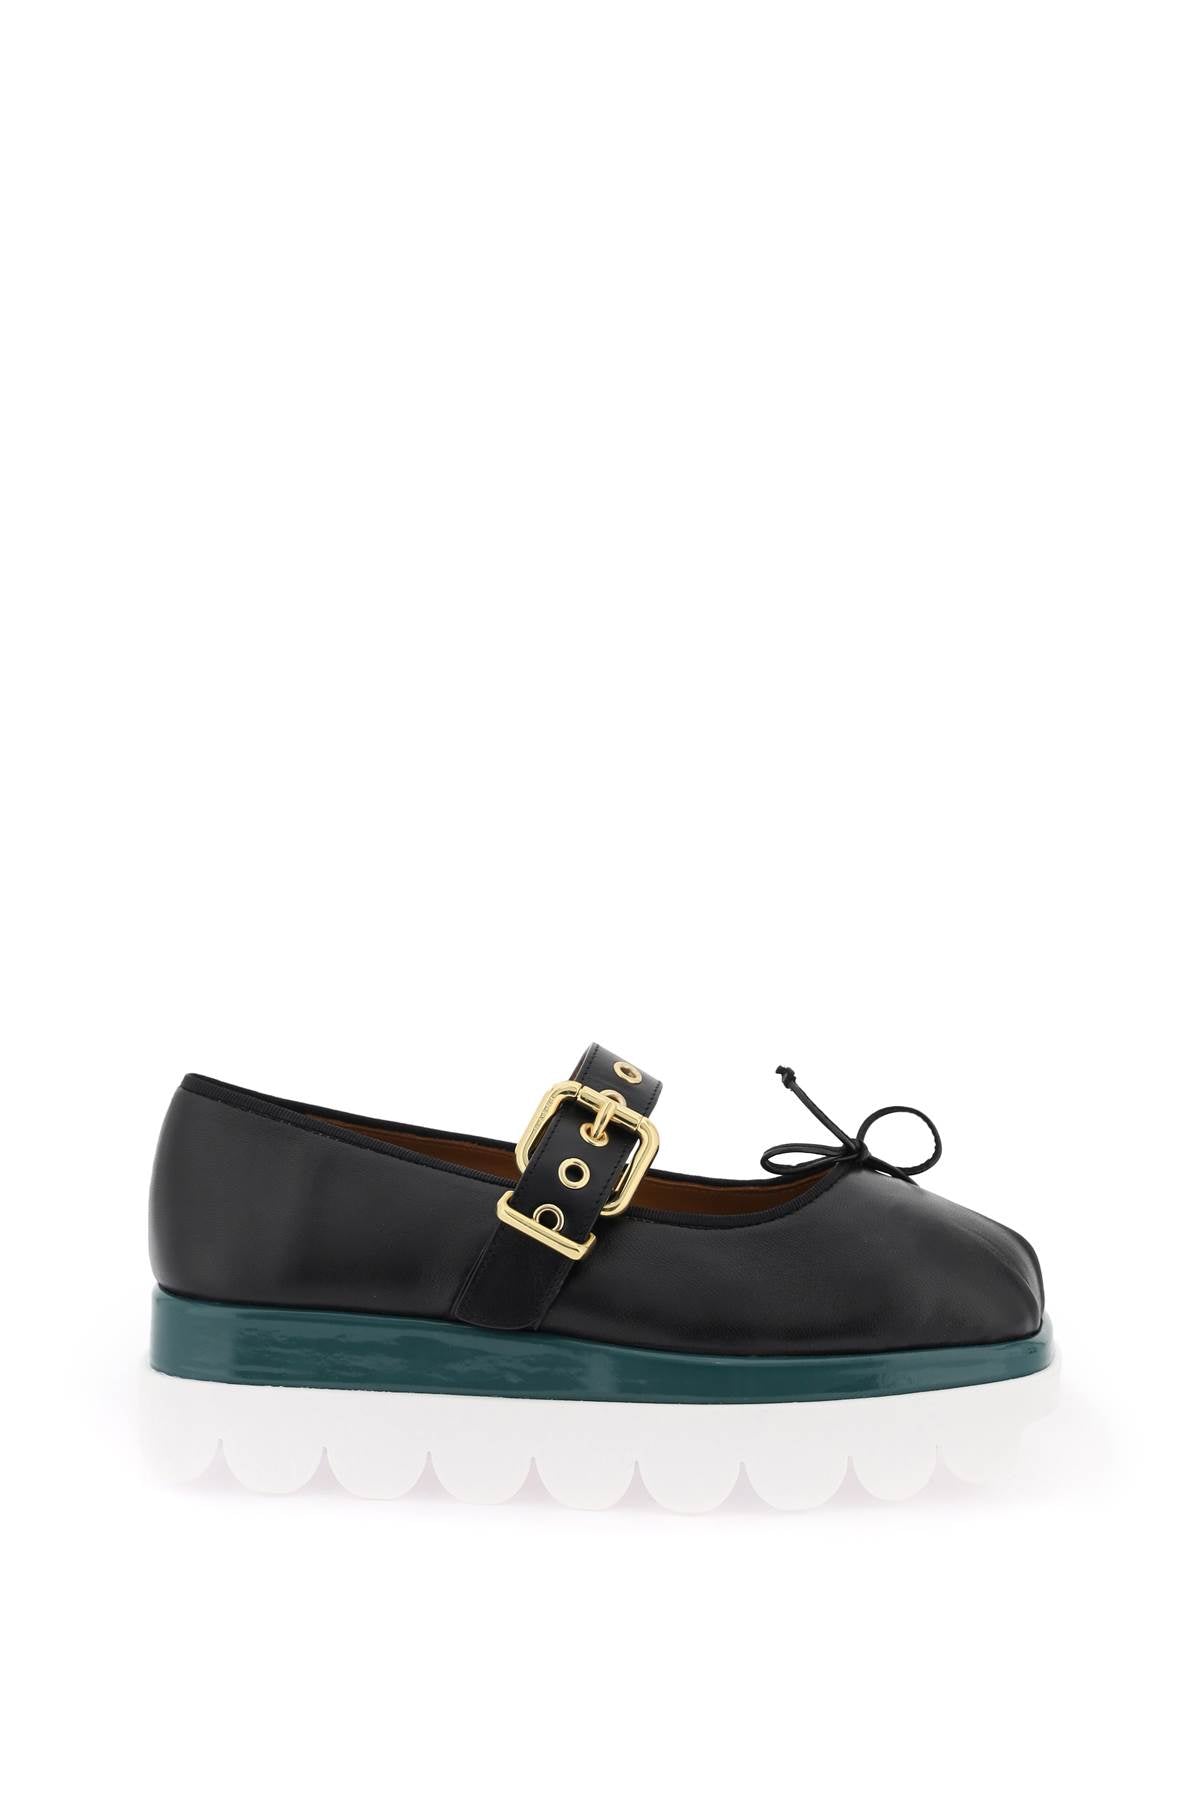 Marni nappa leather mary jane with notched sole-0